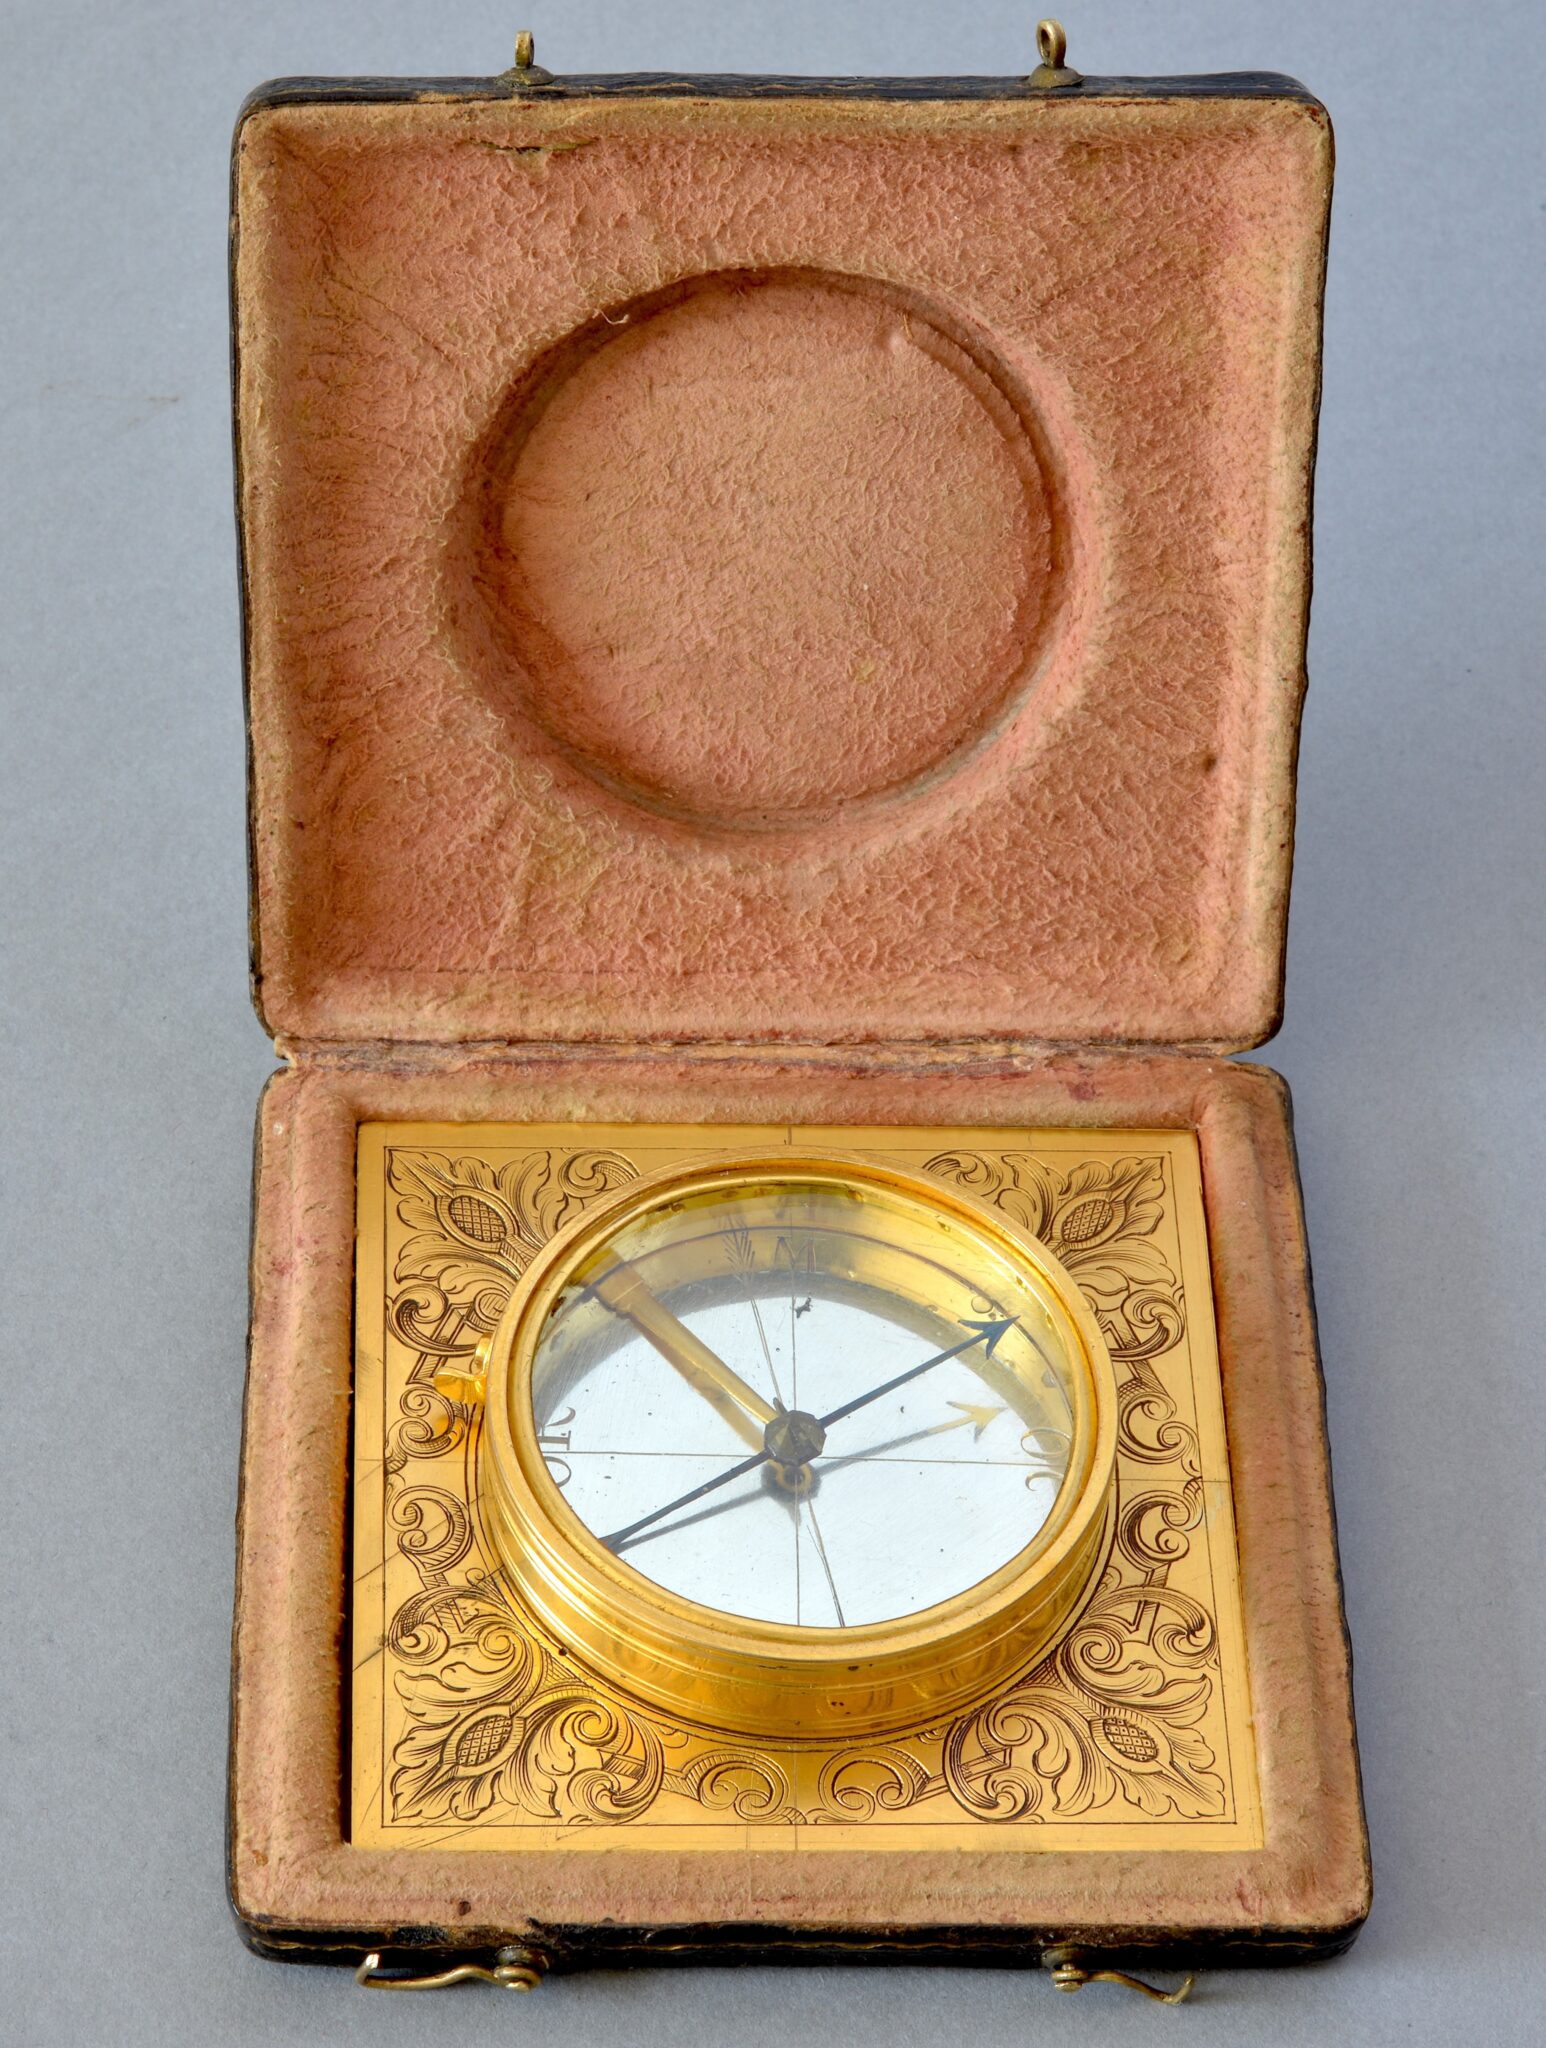 Compass made in Germany circa 1730 in its original case